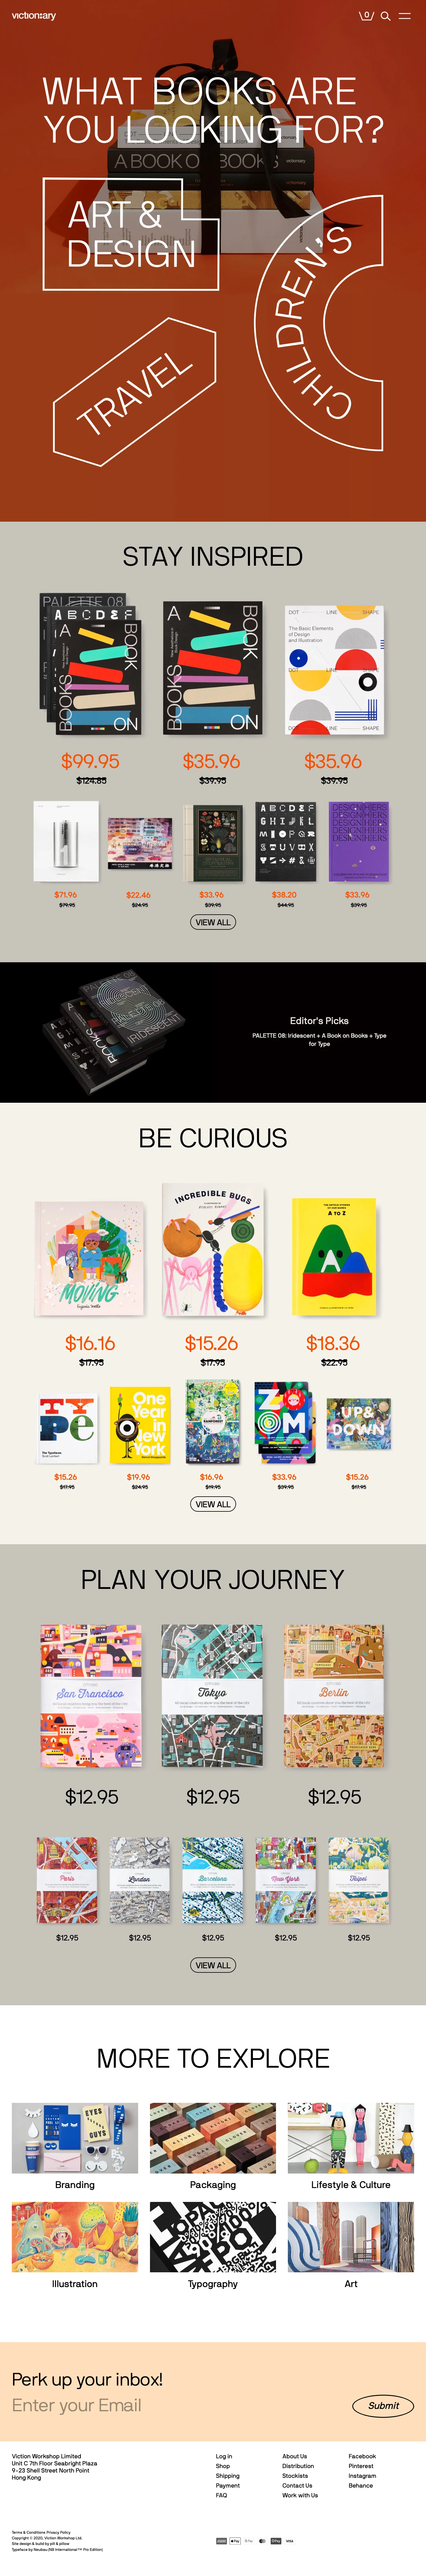 viction:ary Landing Page Example: Victionary is a design book publisher based in Hong Kong with a keen interest in art, graphic design, and illustration. Our family includes VICTION-VICTION children's books and CITIx60 travel guides; and we ship worldwide.